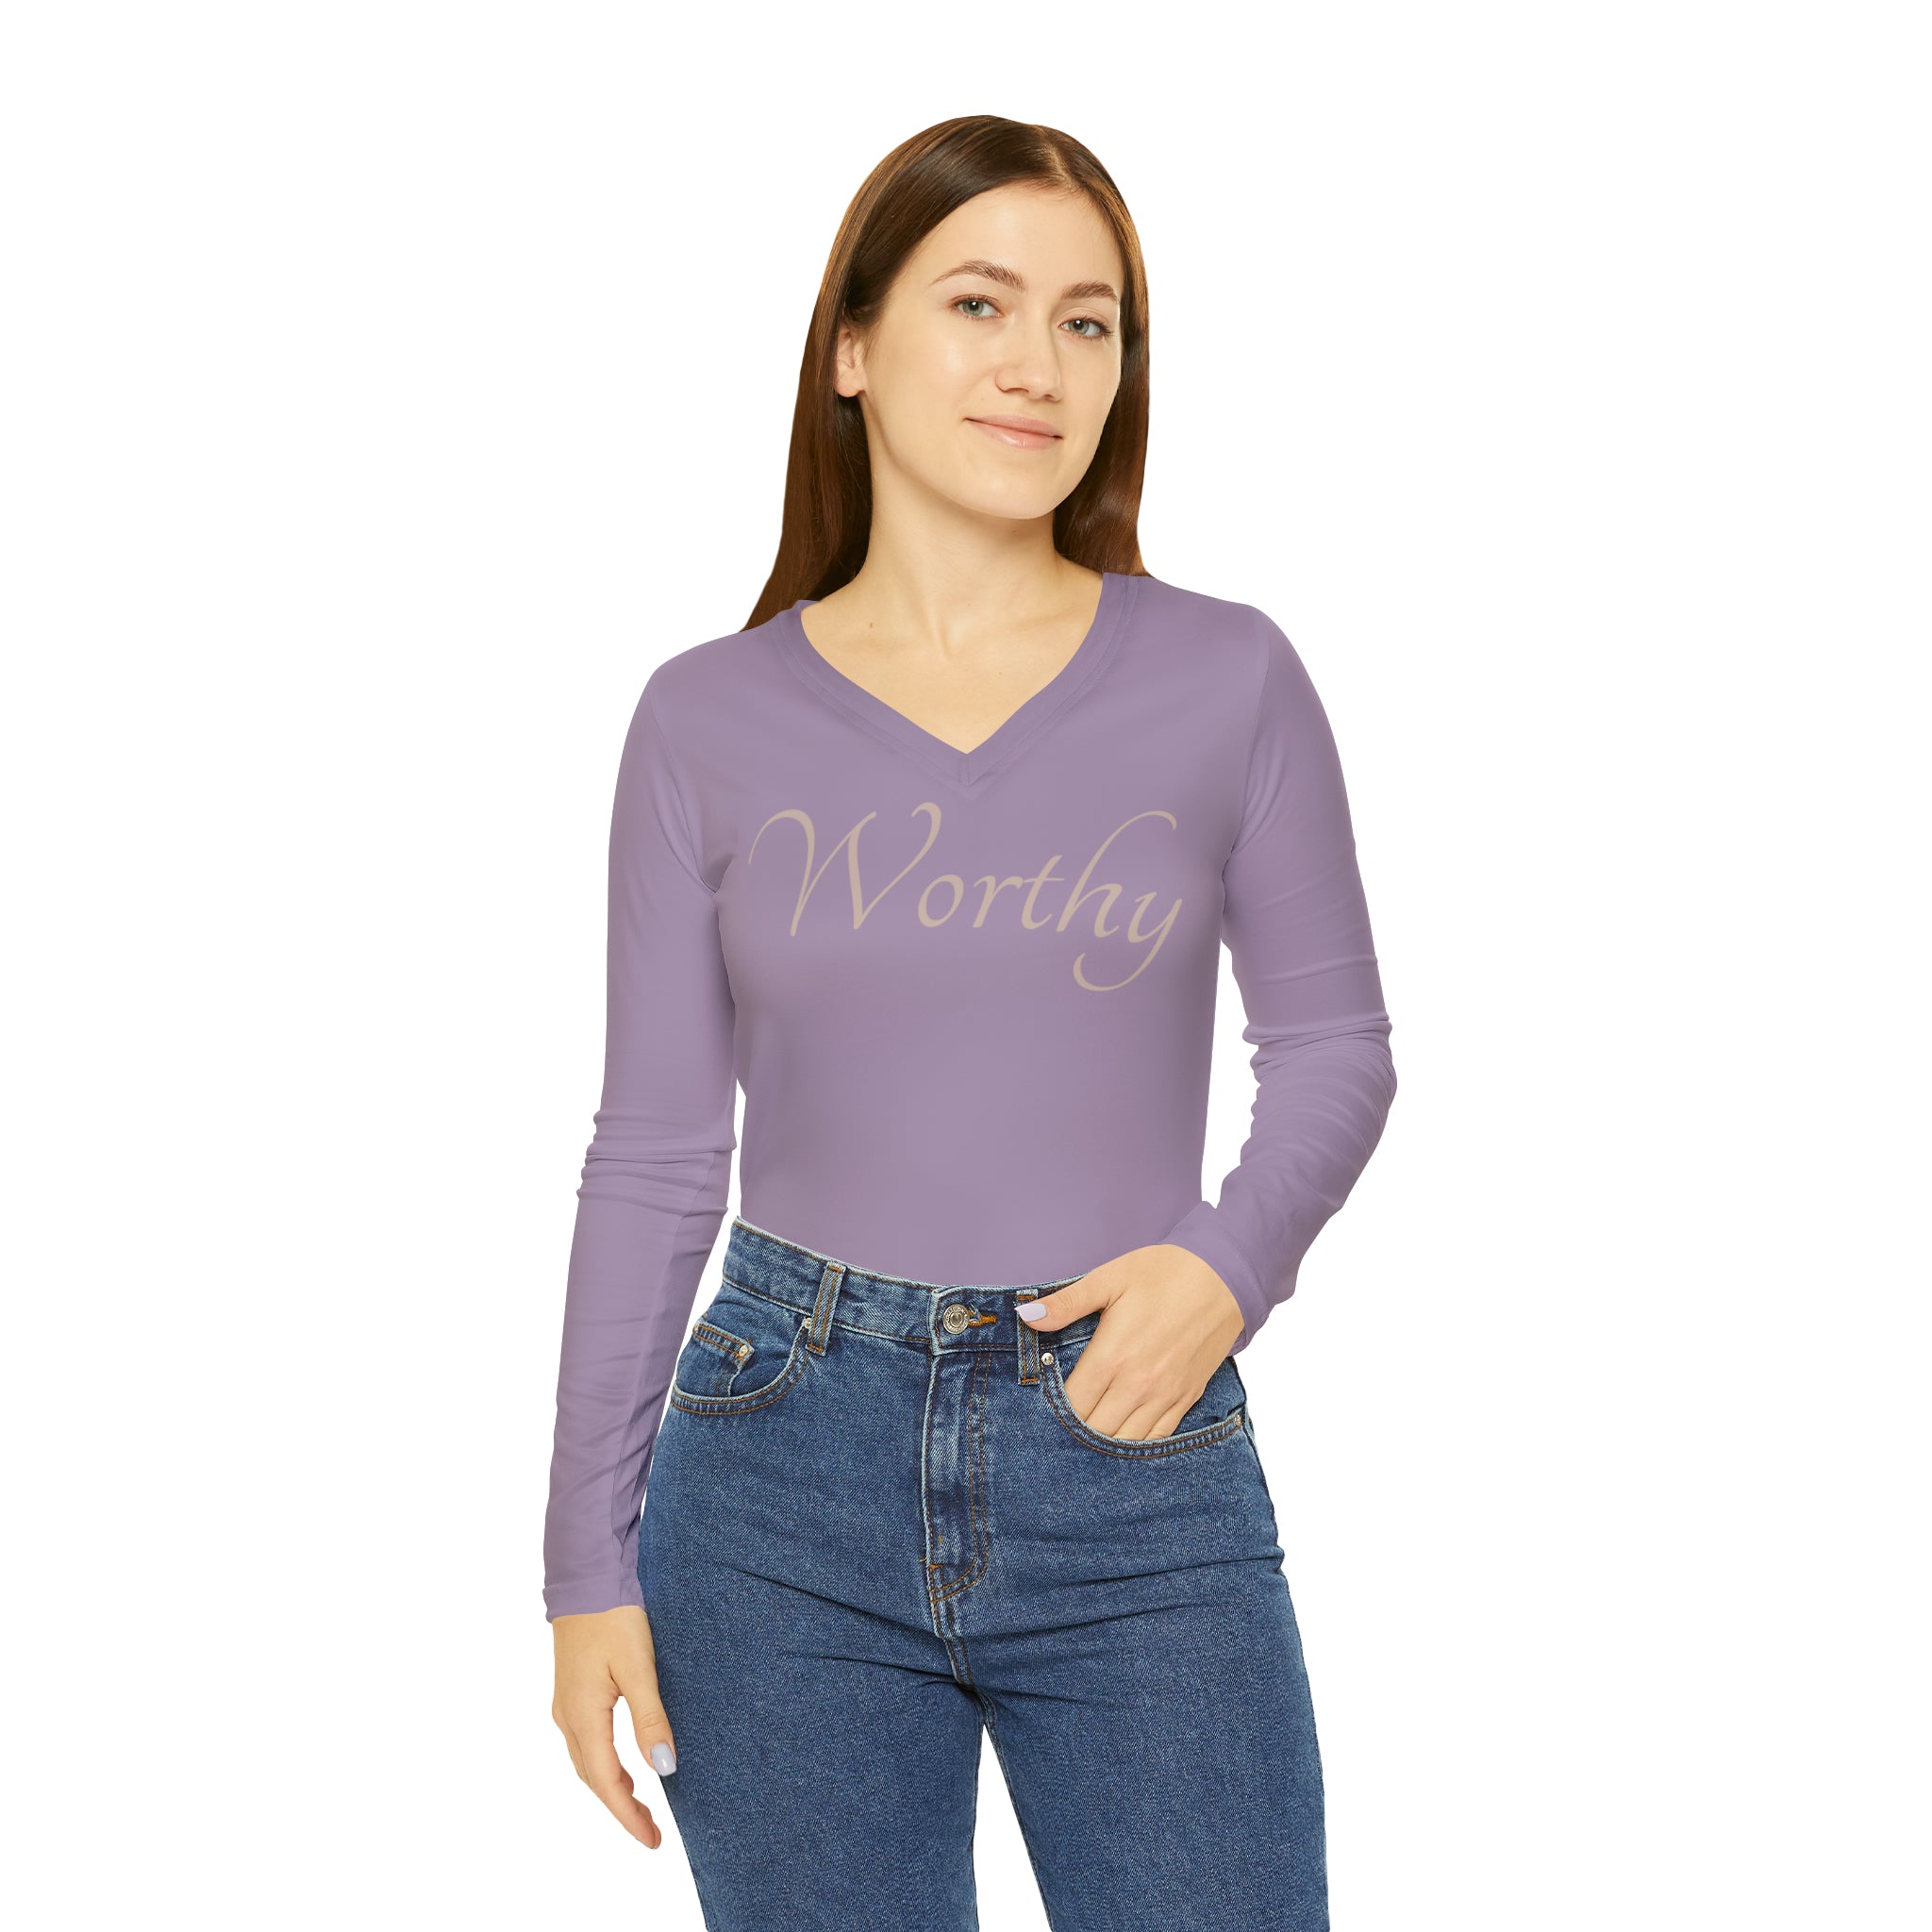 Worthy Long Sleeve Affirmation V-neck Casual Shirt Double Needle Stitching Everyday Wear Mental Health Support Polyester Spandex Blend Statement Shirt Worthy Shirt All Over Prints 15903407436546118269_2048 Printify